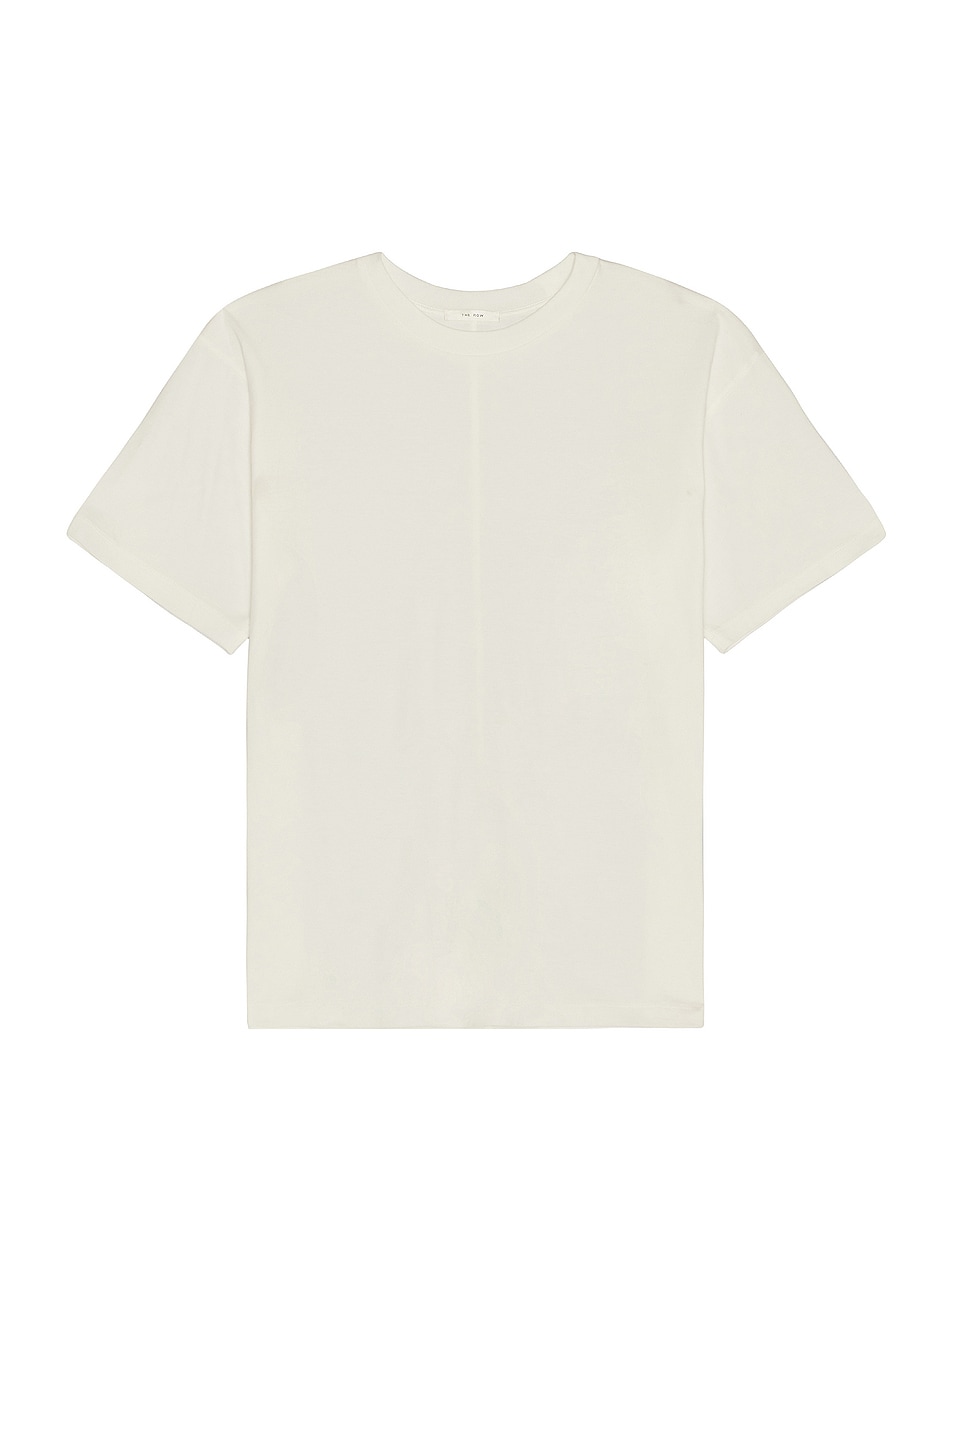 Image 1 of The Row Nilson Top in White